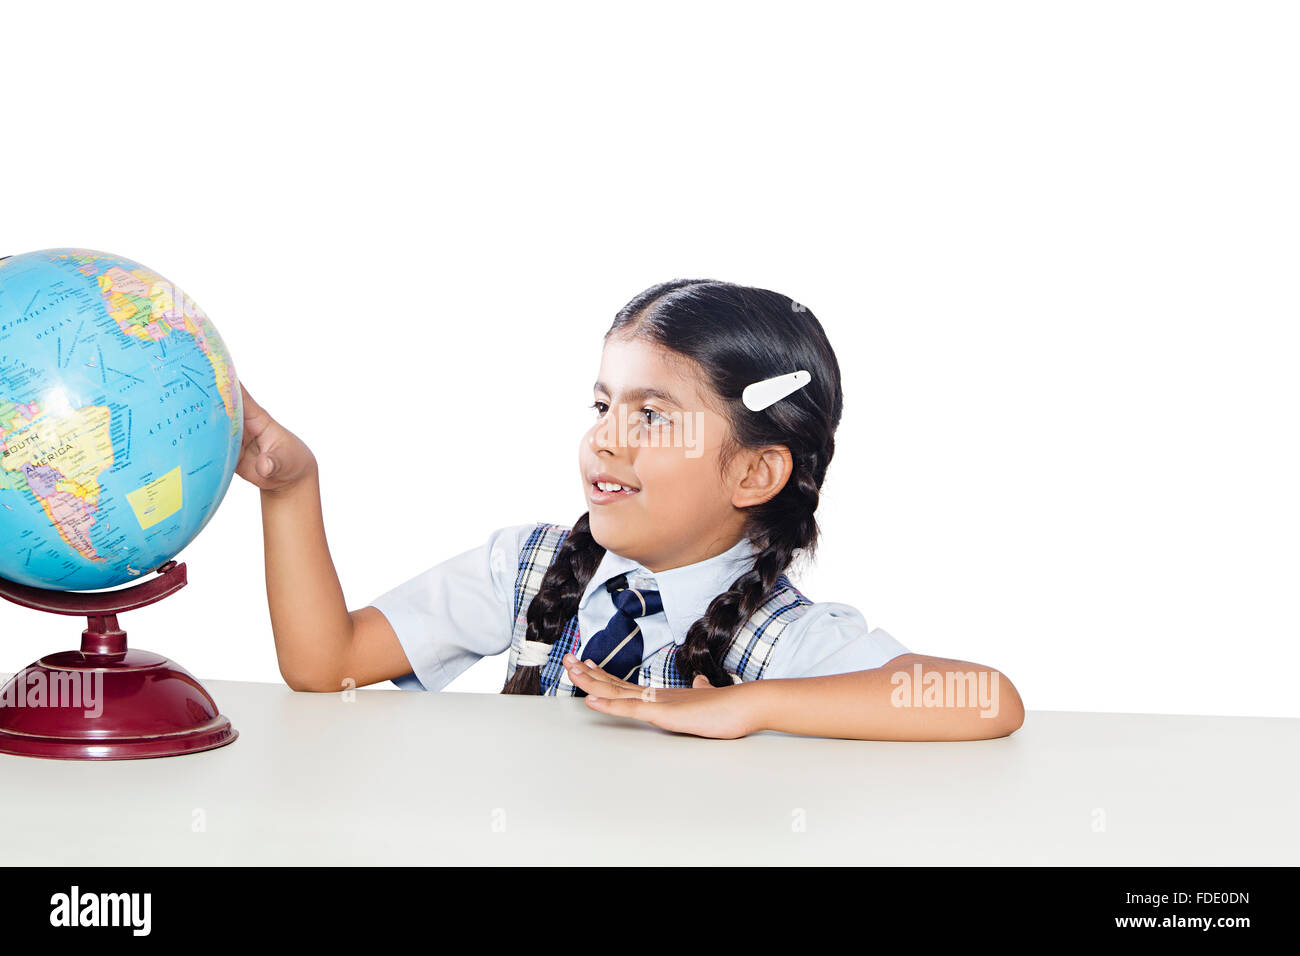 1 Person Only Education Girl Indoor Kid School Searching Student Studying World Globe Stock Photo